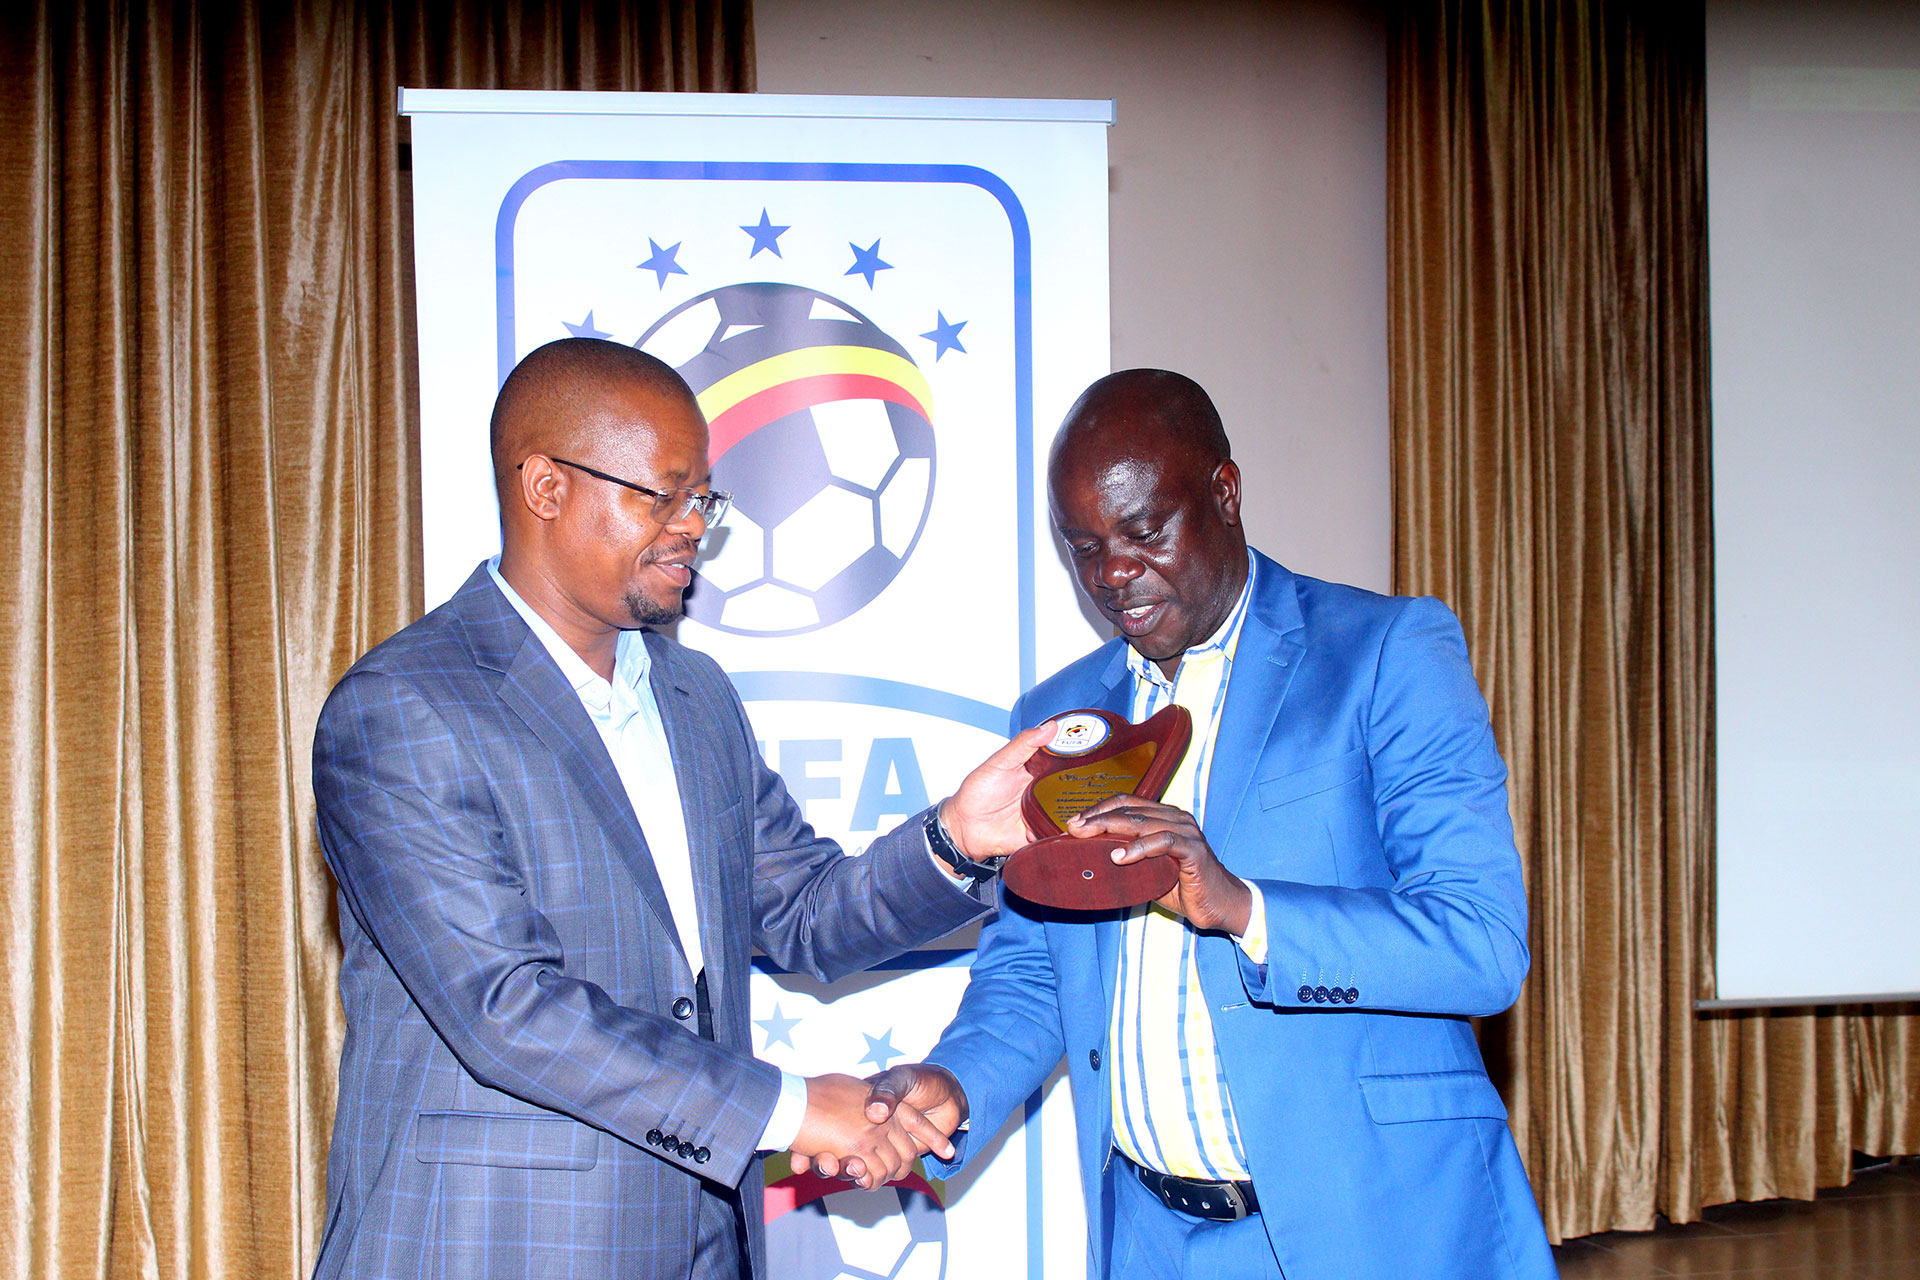 former FUFA communications Manager Rogers Mulindwa (R) receives appreciation accolade from FUFA President